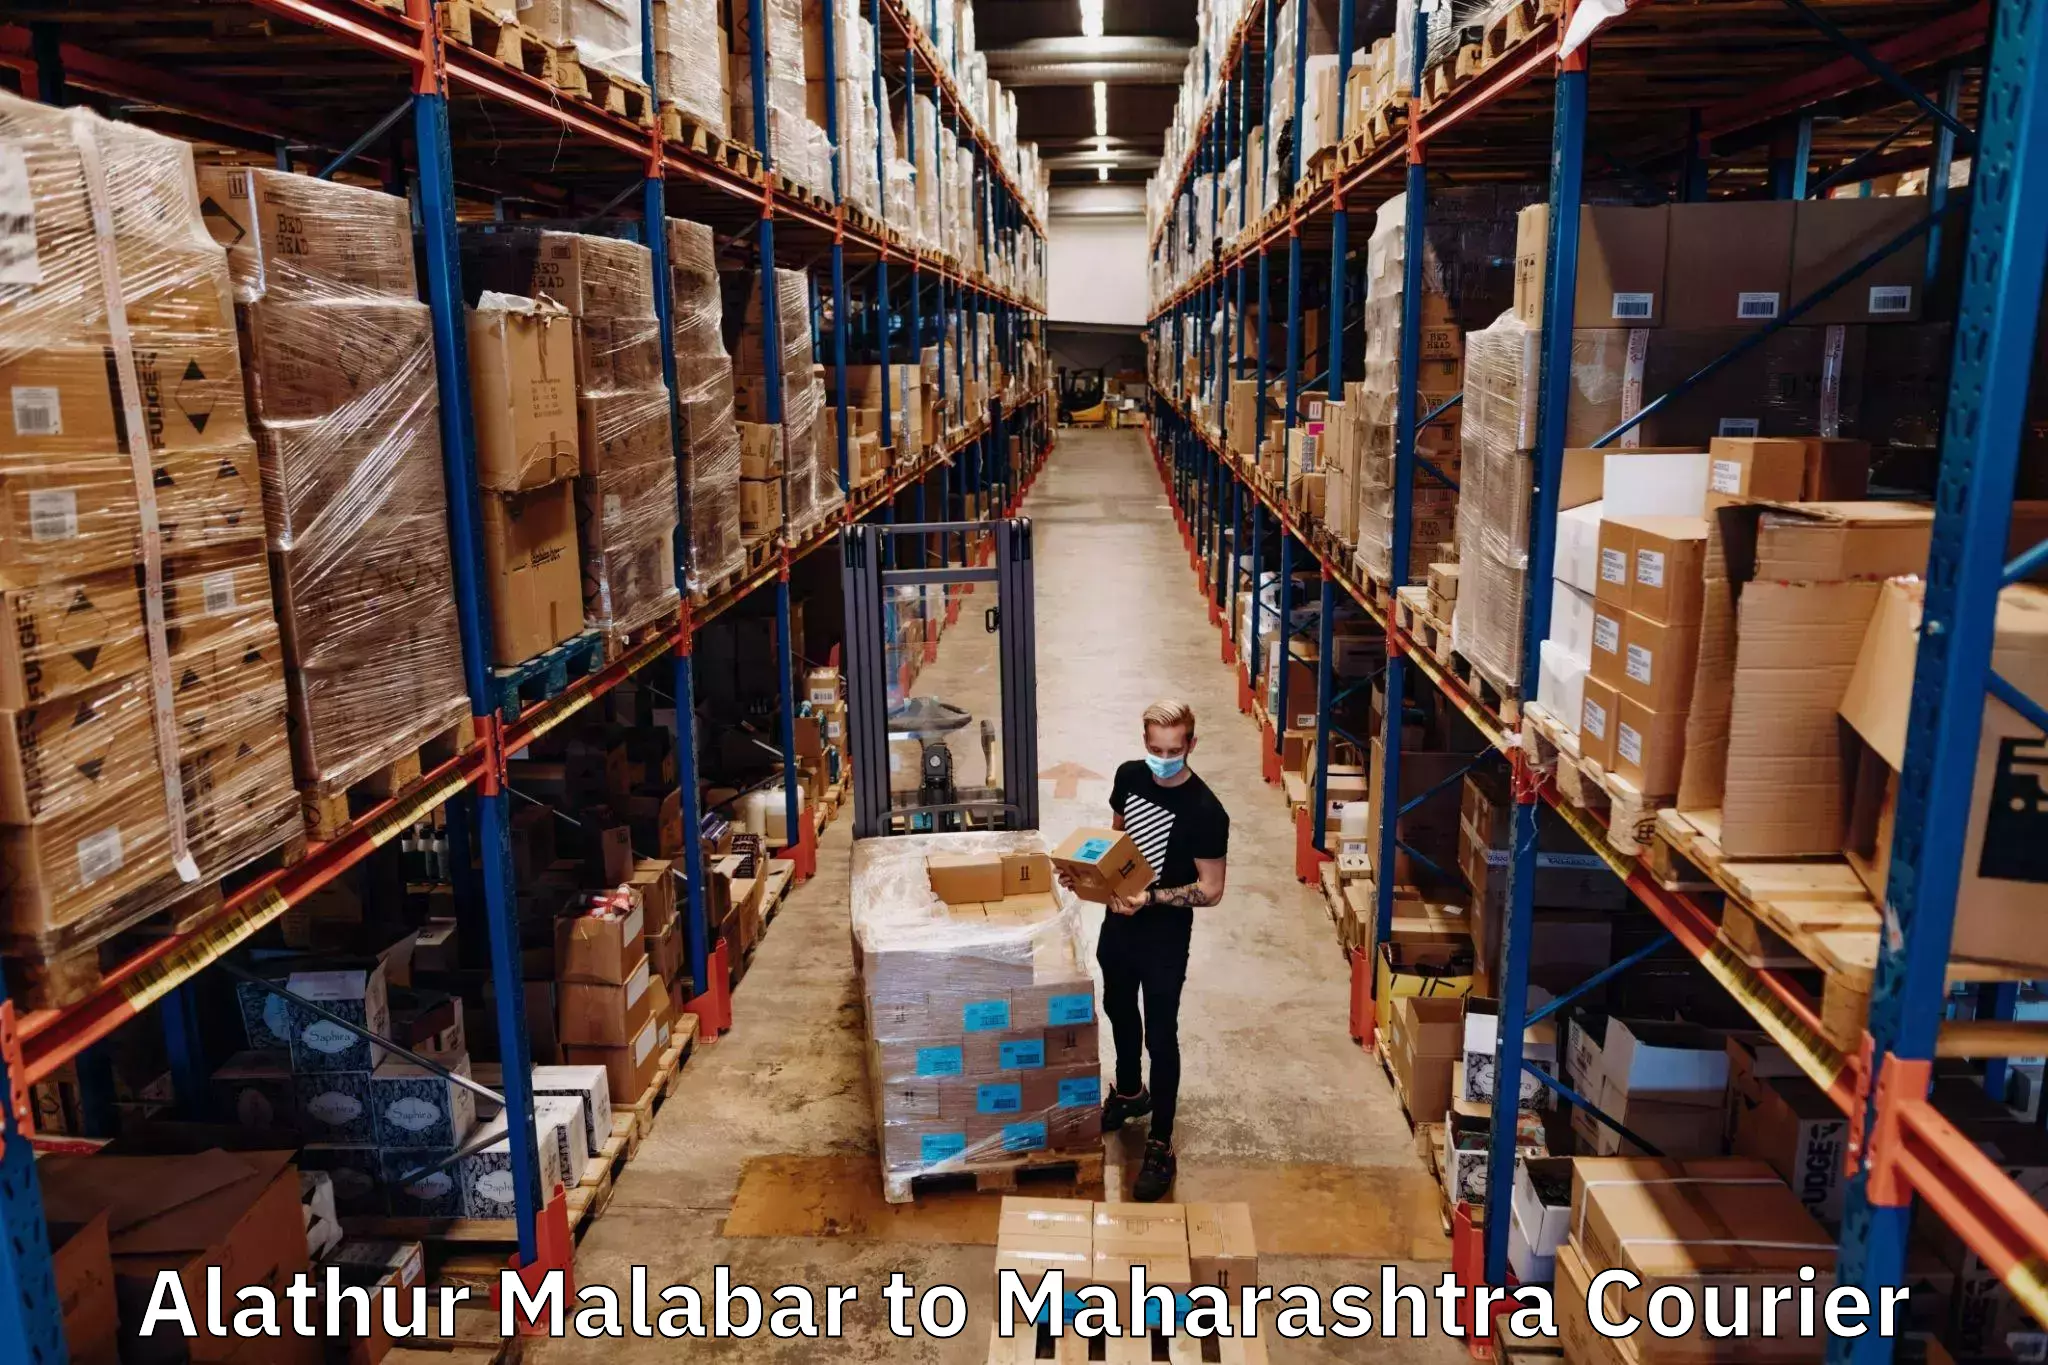 24-hour courier services Alathur Malabar to Pune